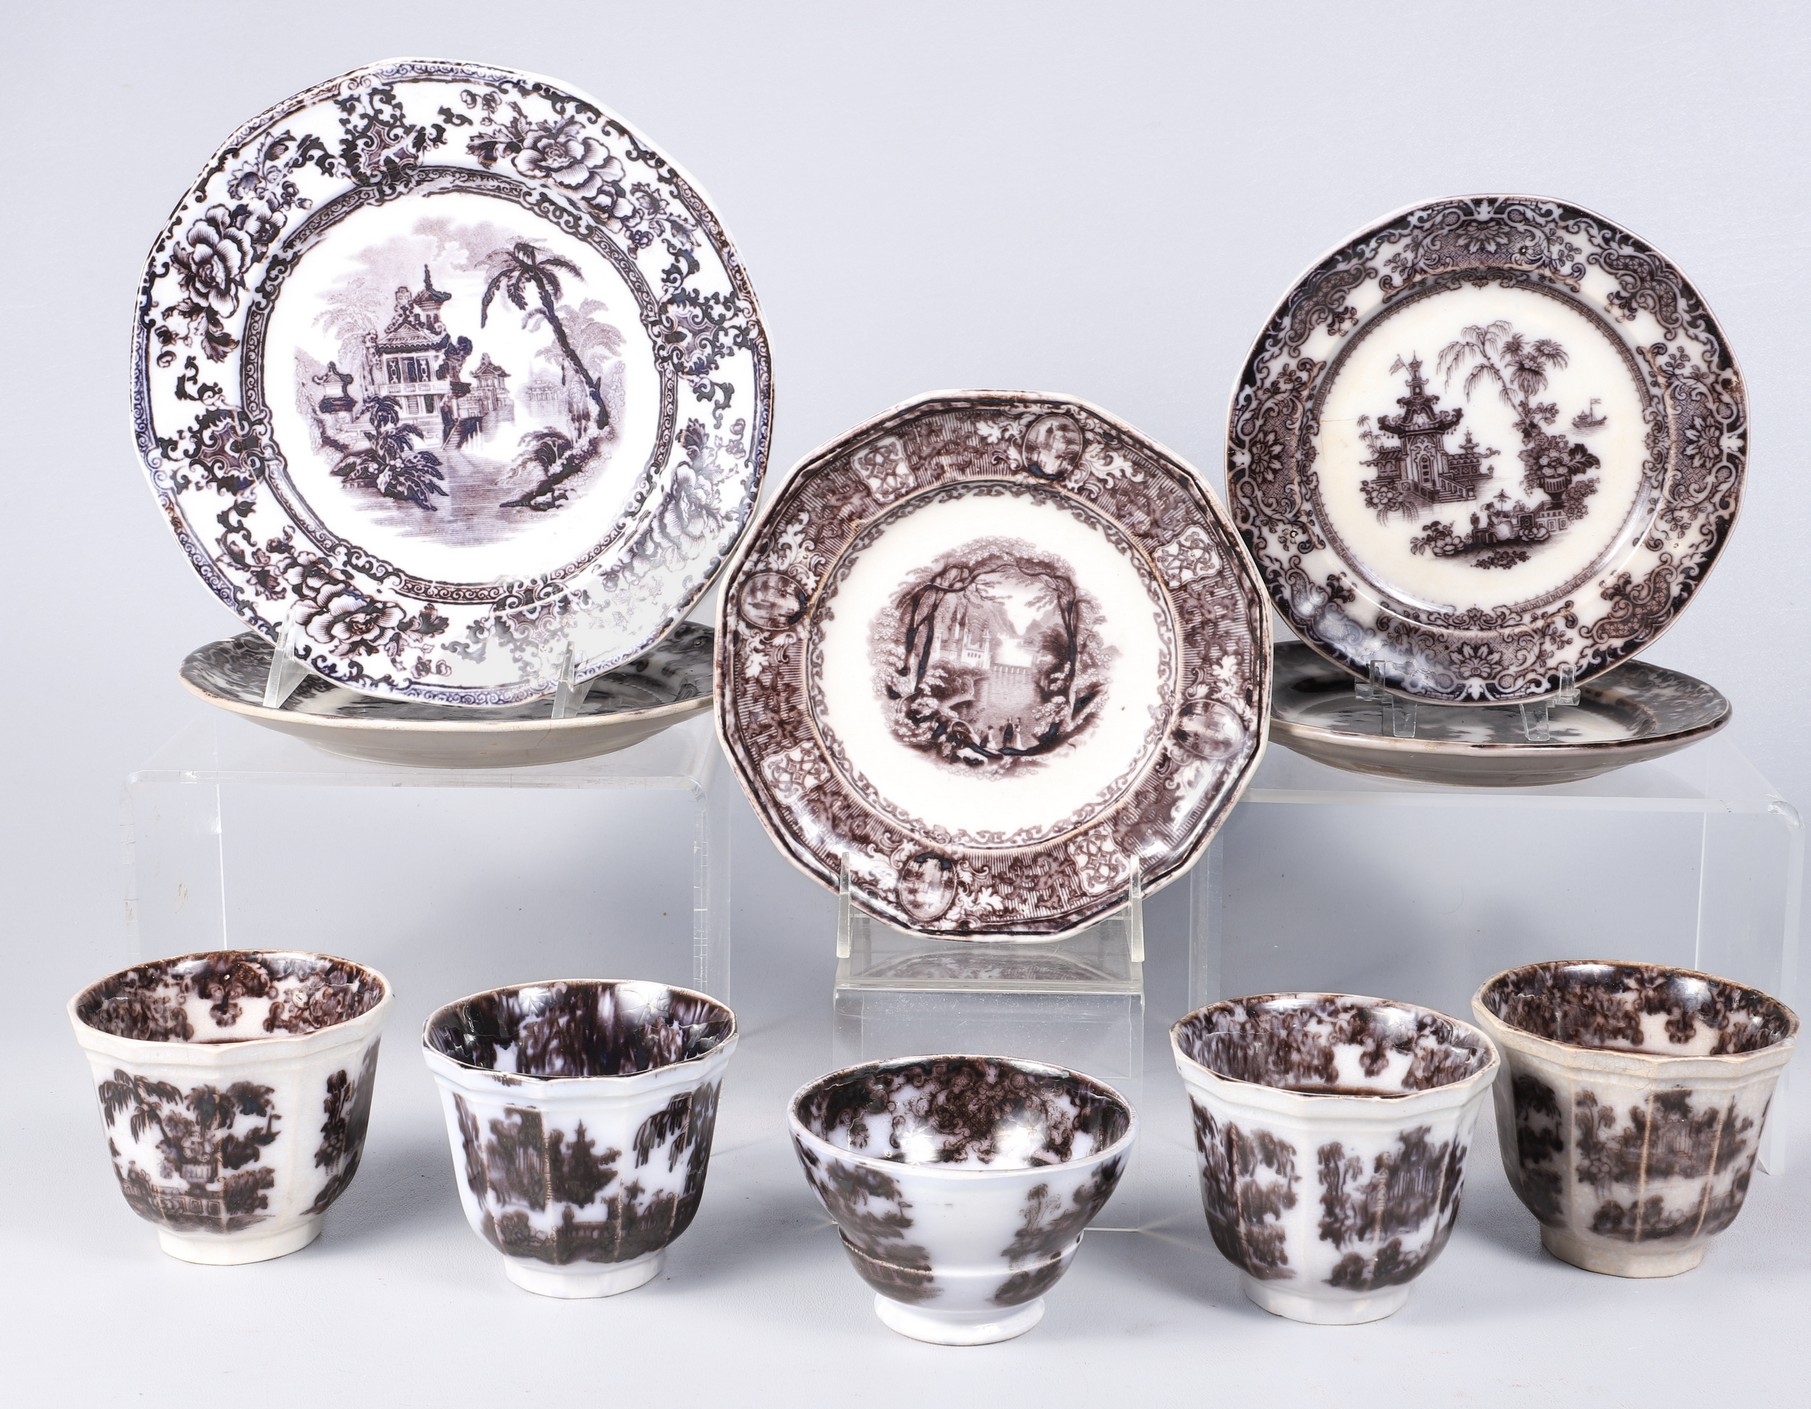 Ten pieces of 19th century Staffordshire